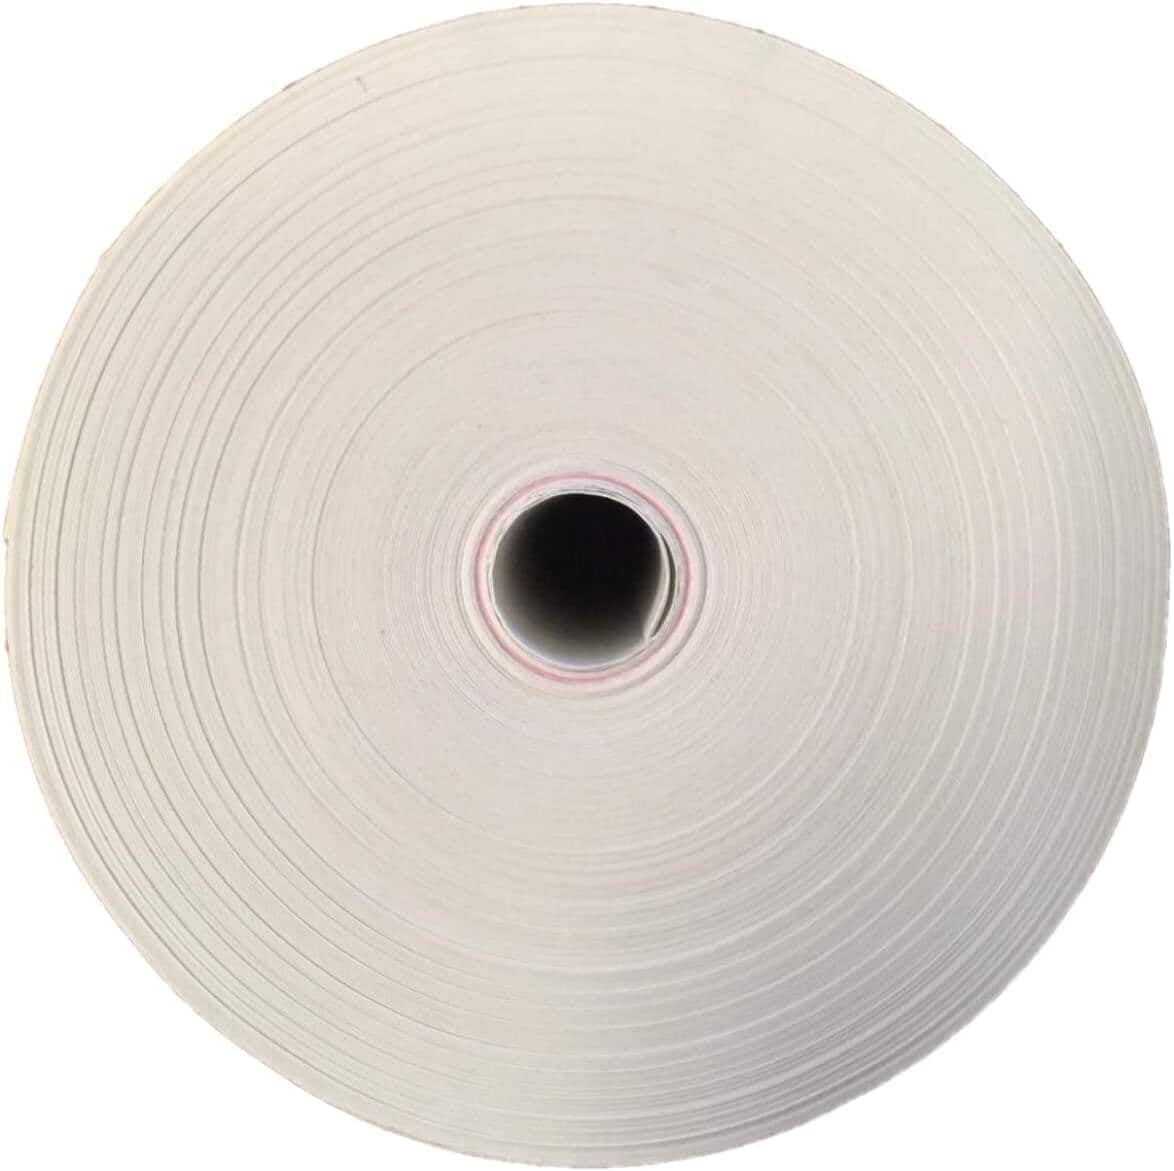 FHS 3 1/8" x 230' Thermal Receipt Paper(50 Rolls) - for Most Receipt Printers, POS Thermal Receipt Paper Rolls fhs-paperrolls